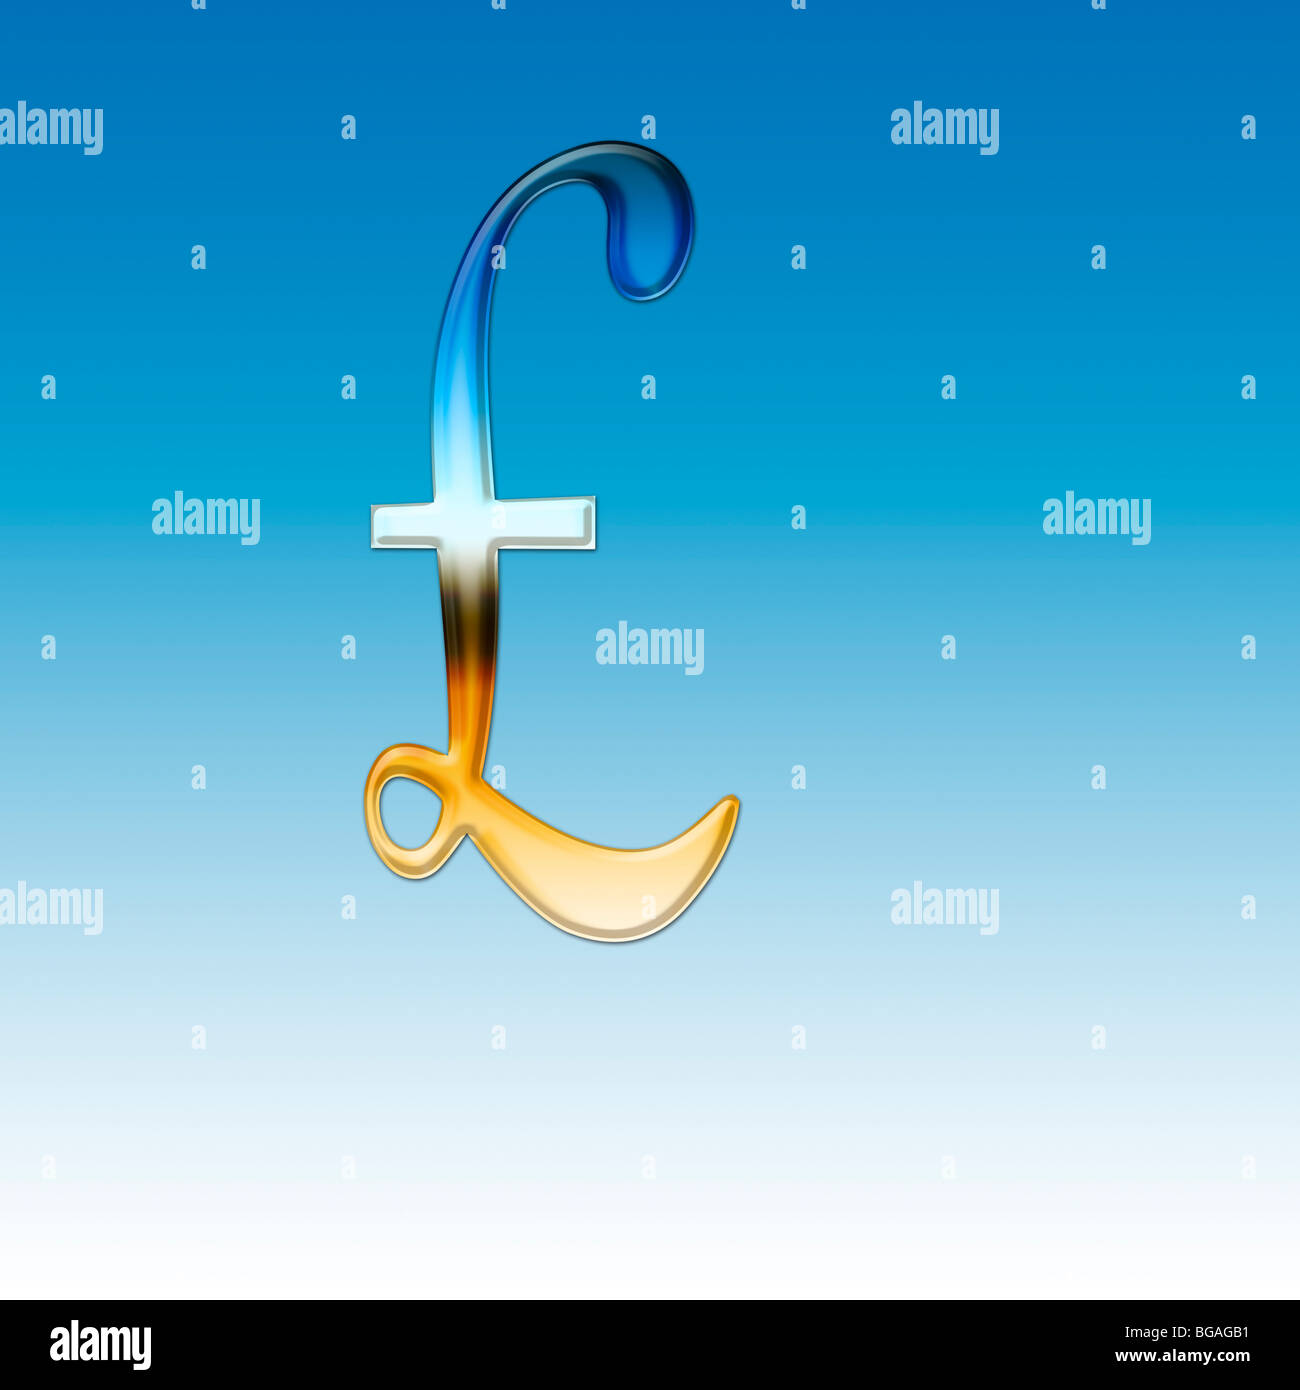 Sterling Pound Sign Stock Photo